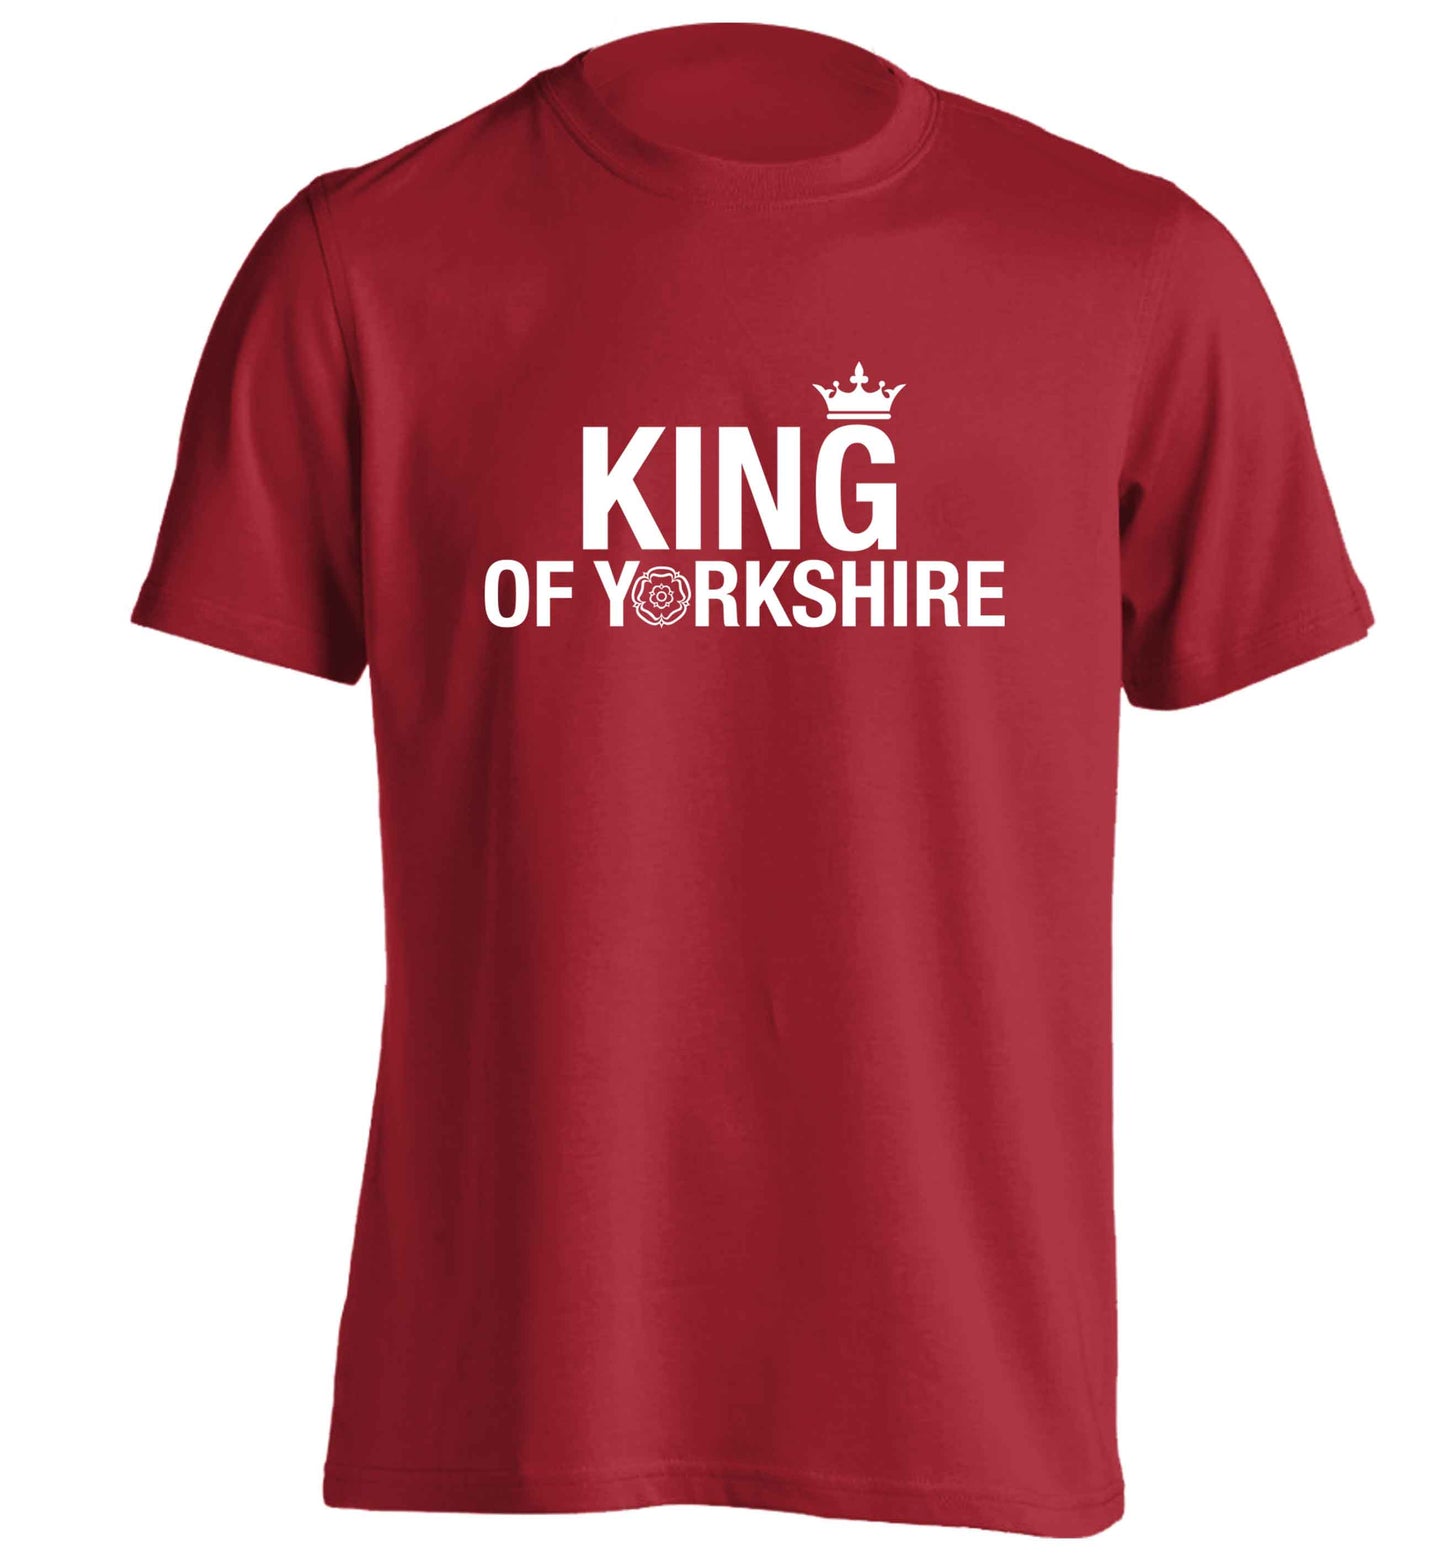 King of Yorkshire adults unisex red Tshirt 2XL